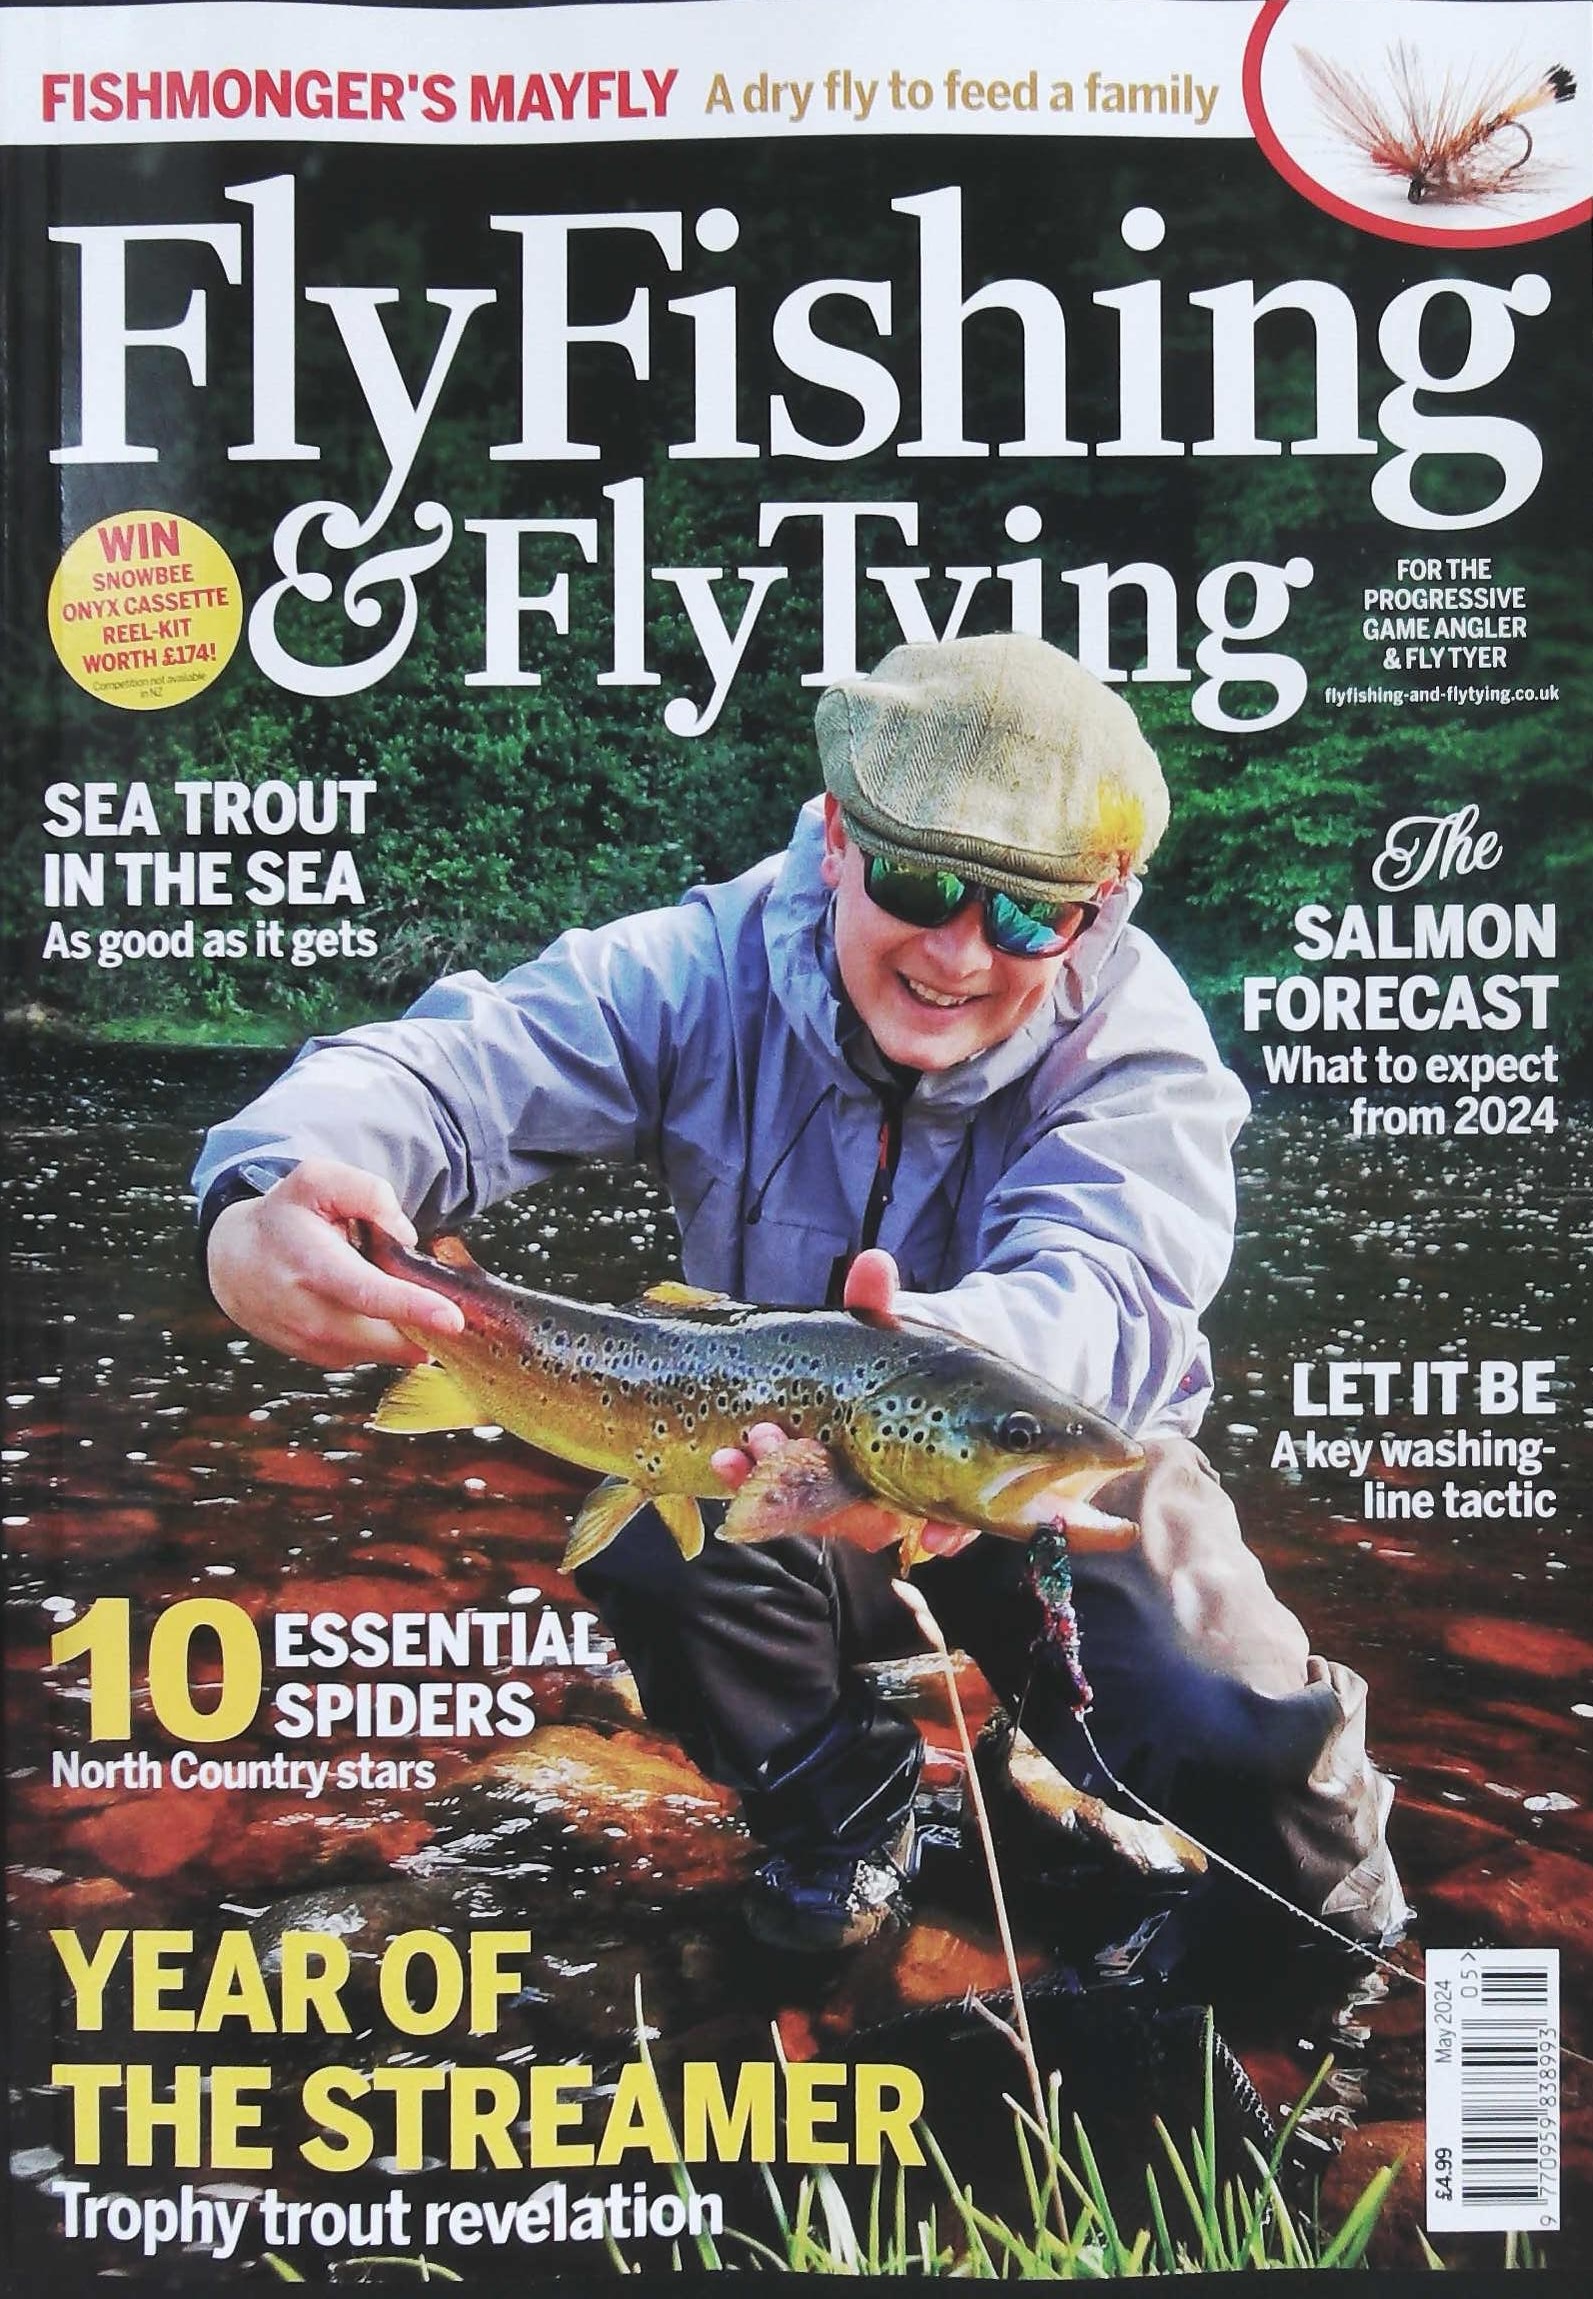 FLY FISHING AND FLY TYING